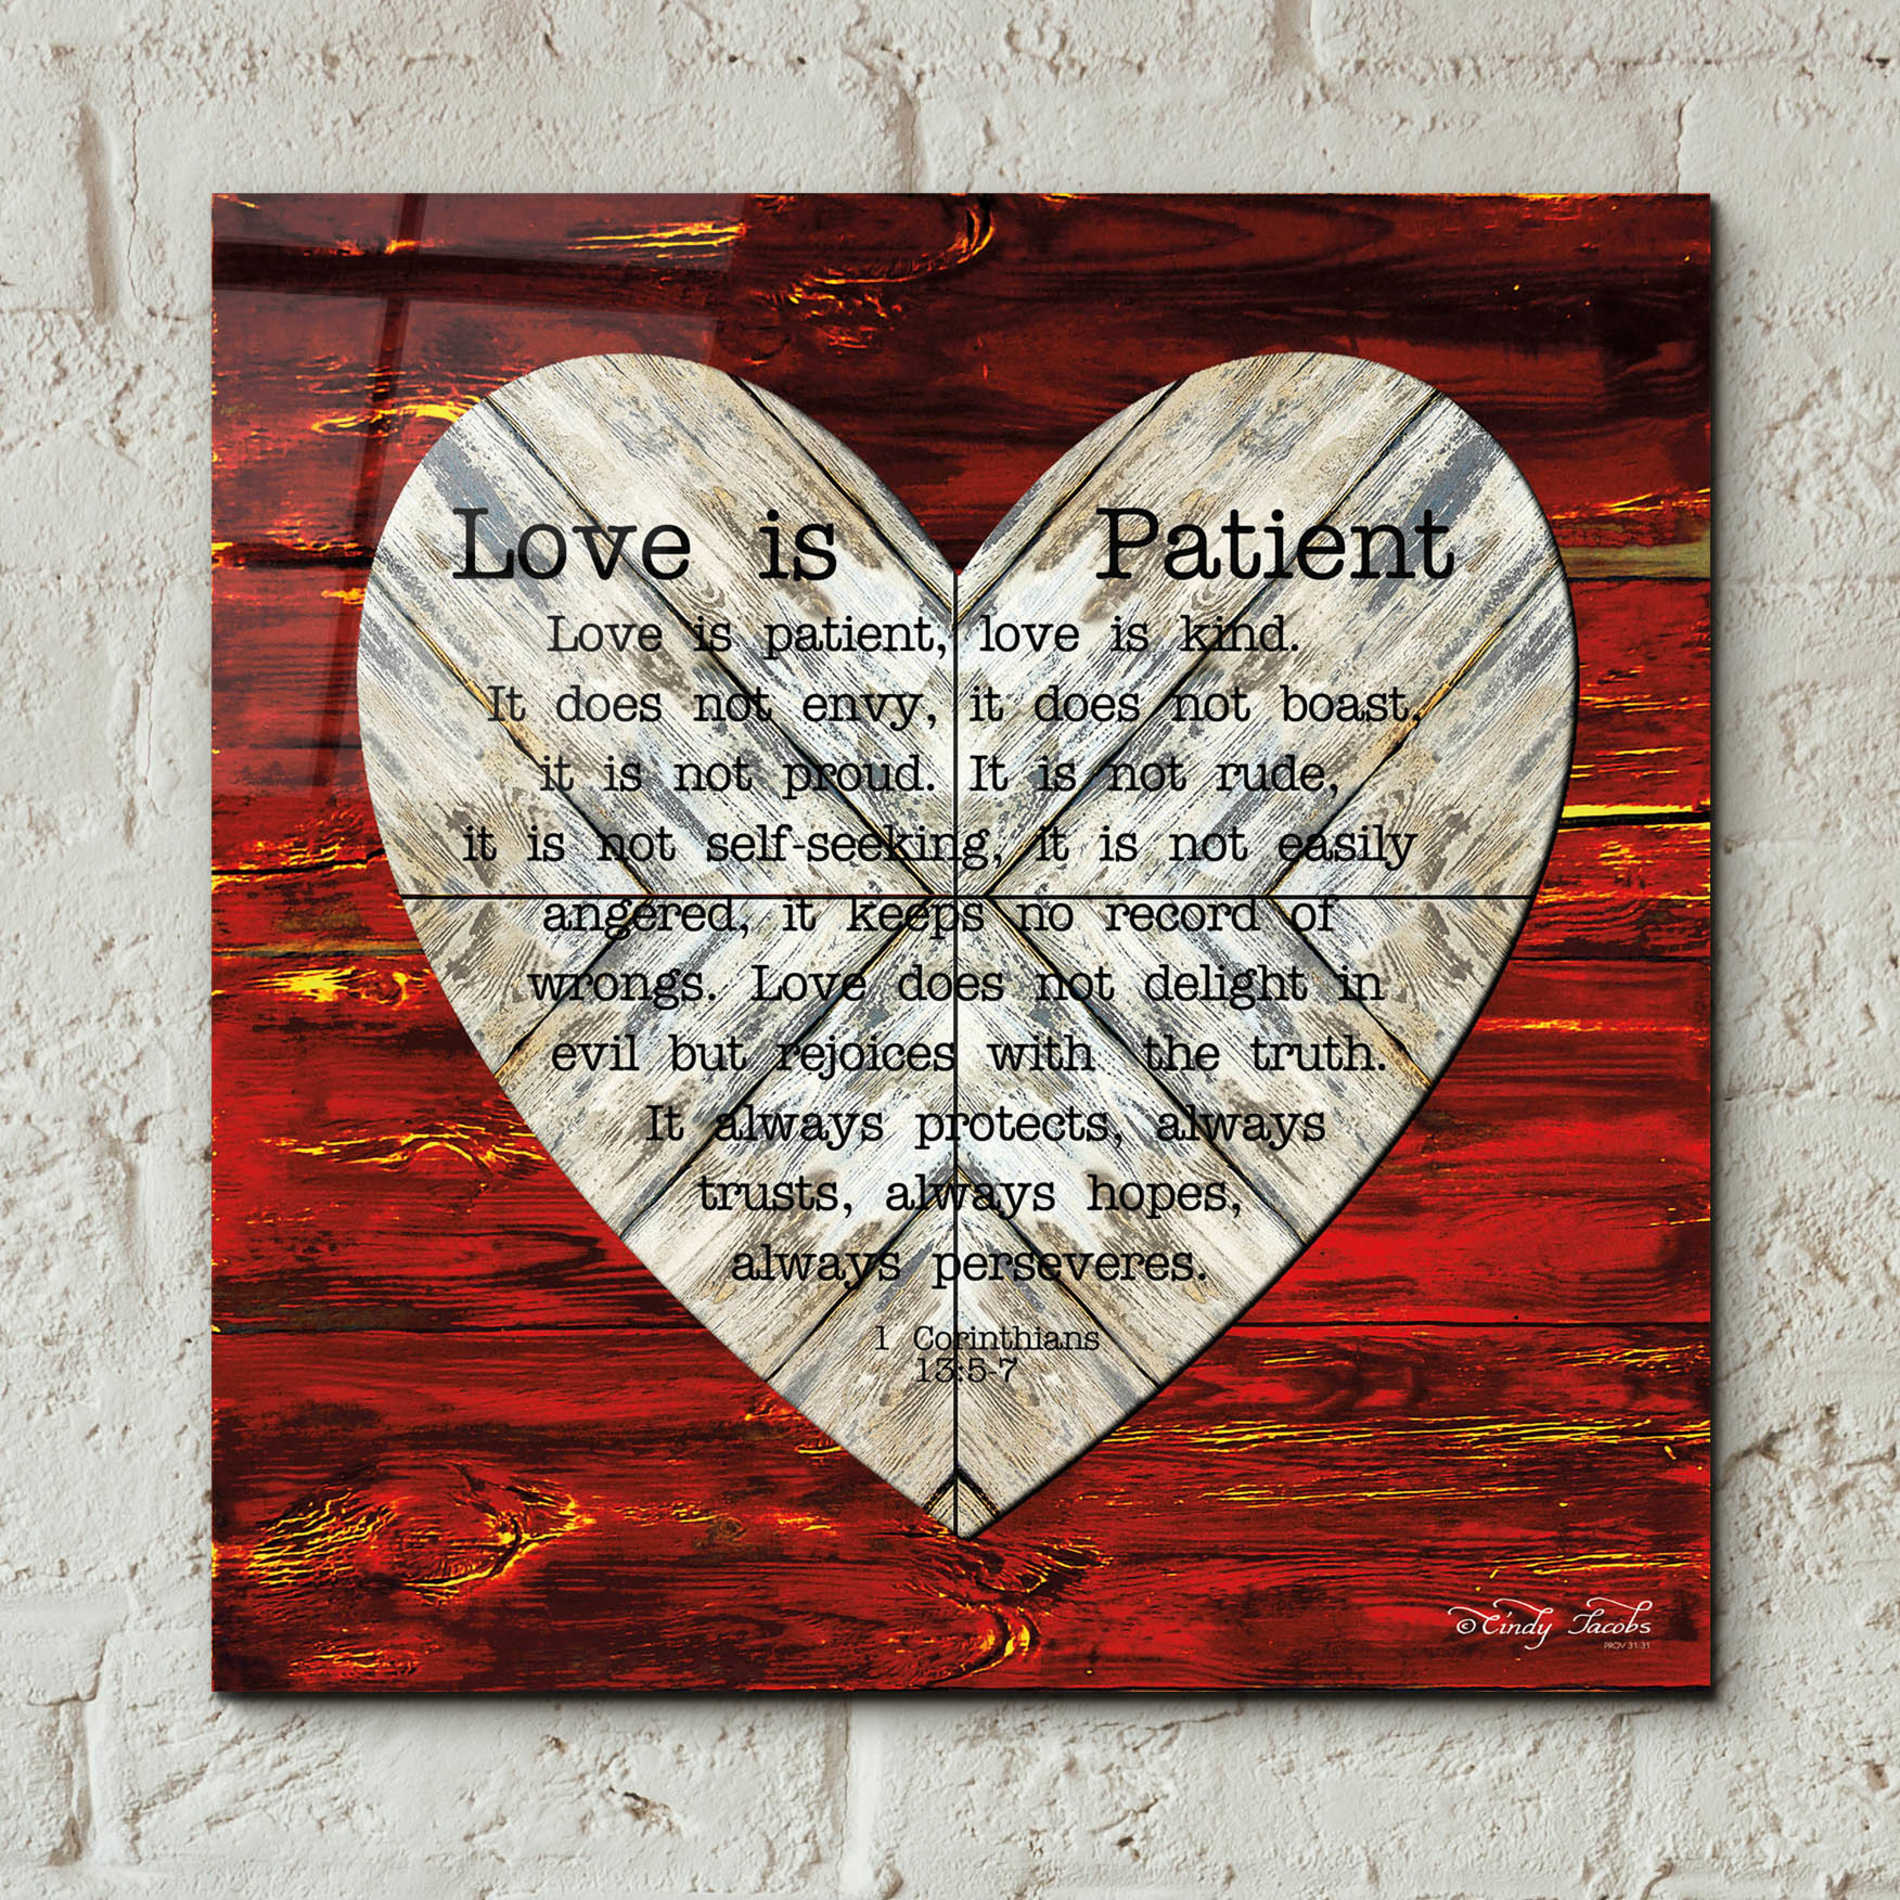 Epic Art 'Love is Patient' by Cindy Jacobs, Acrylic Glass Wall Art,12x12